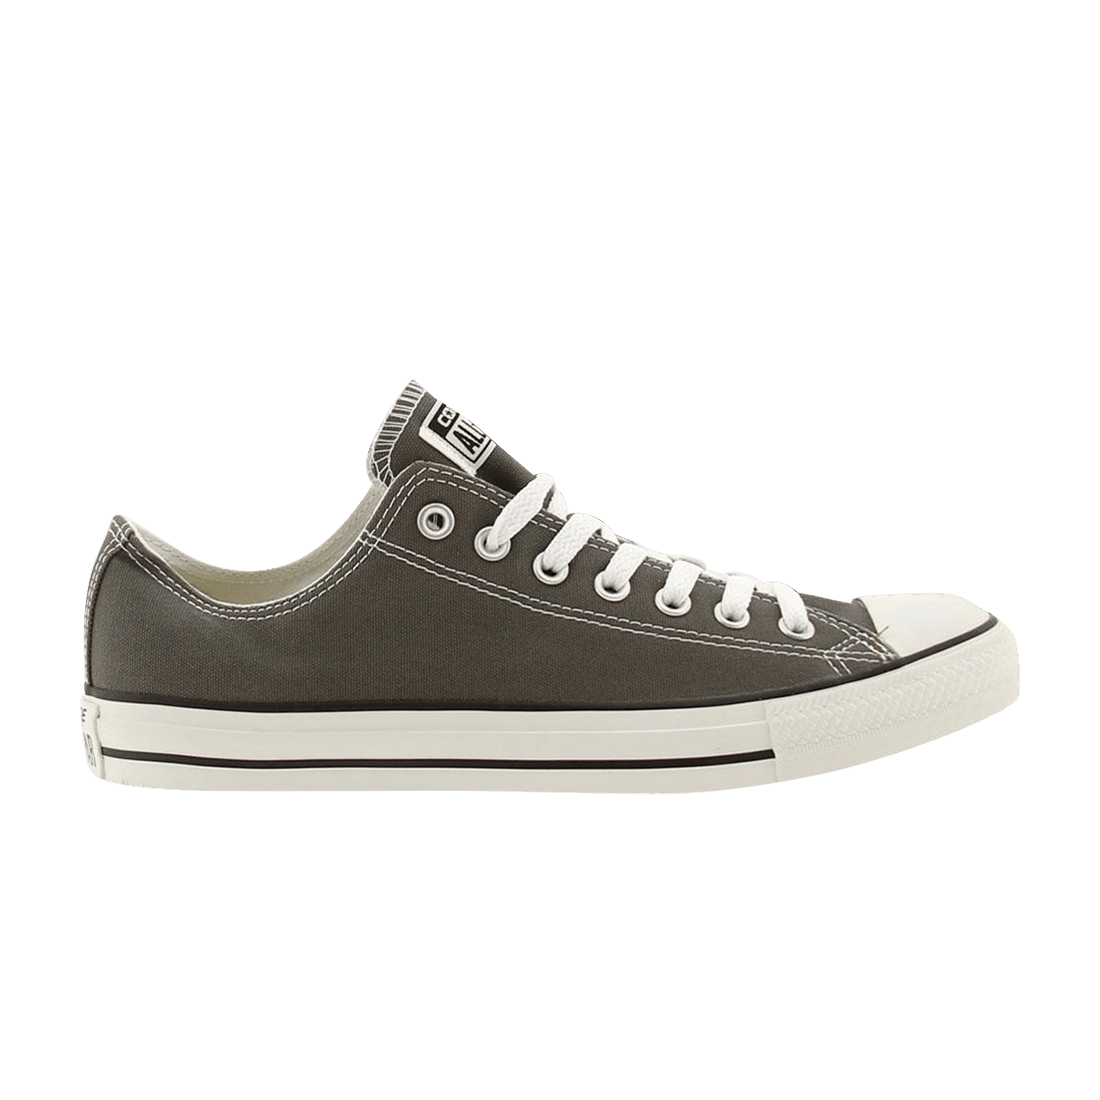 Chuck Taylor All Star Low Ox 'Charcoal'